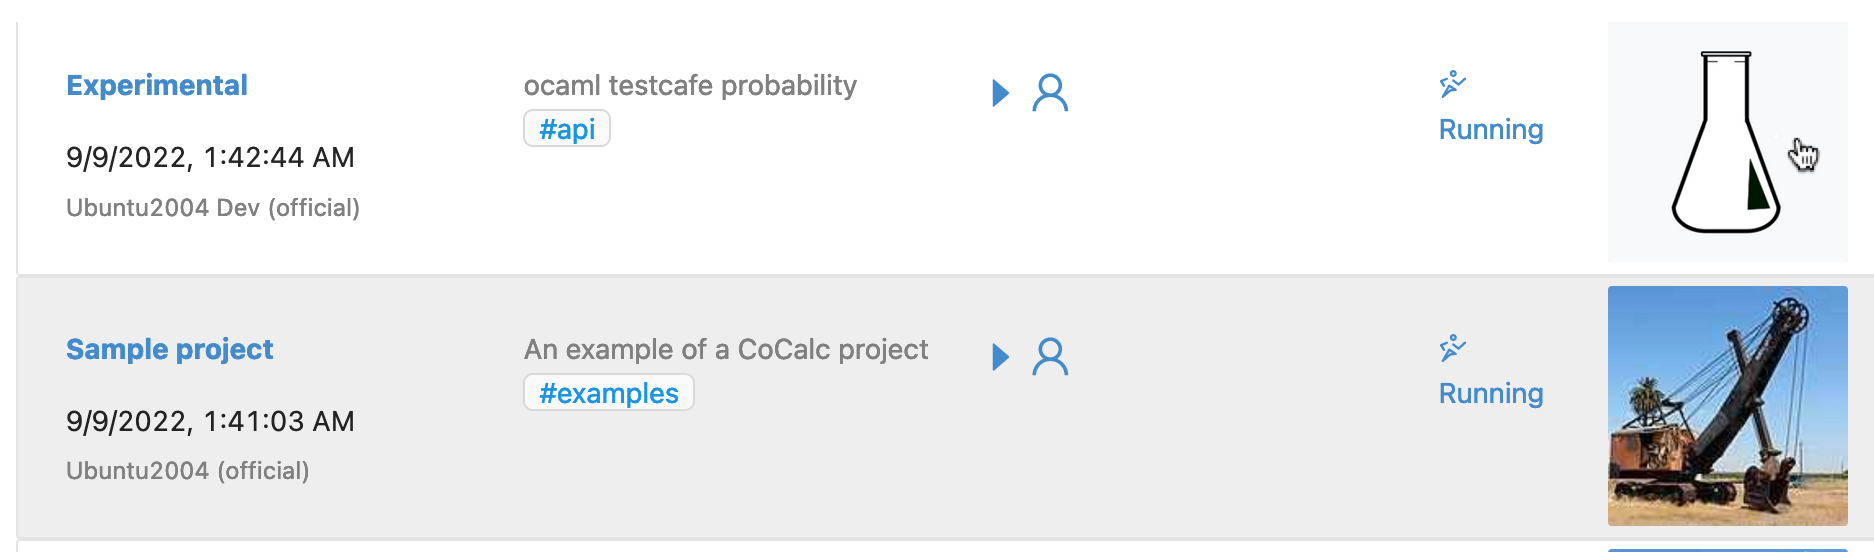 clickable project image in project list